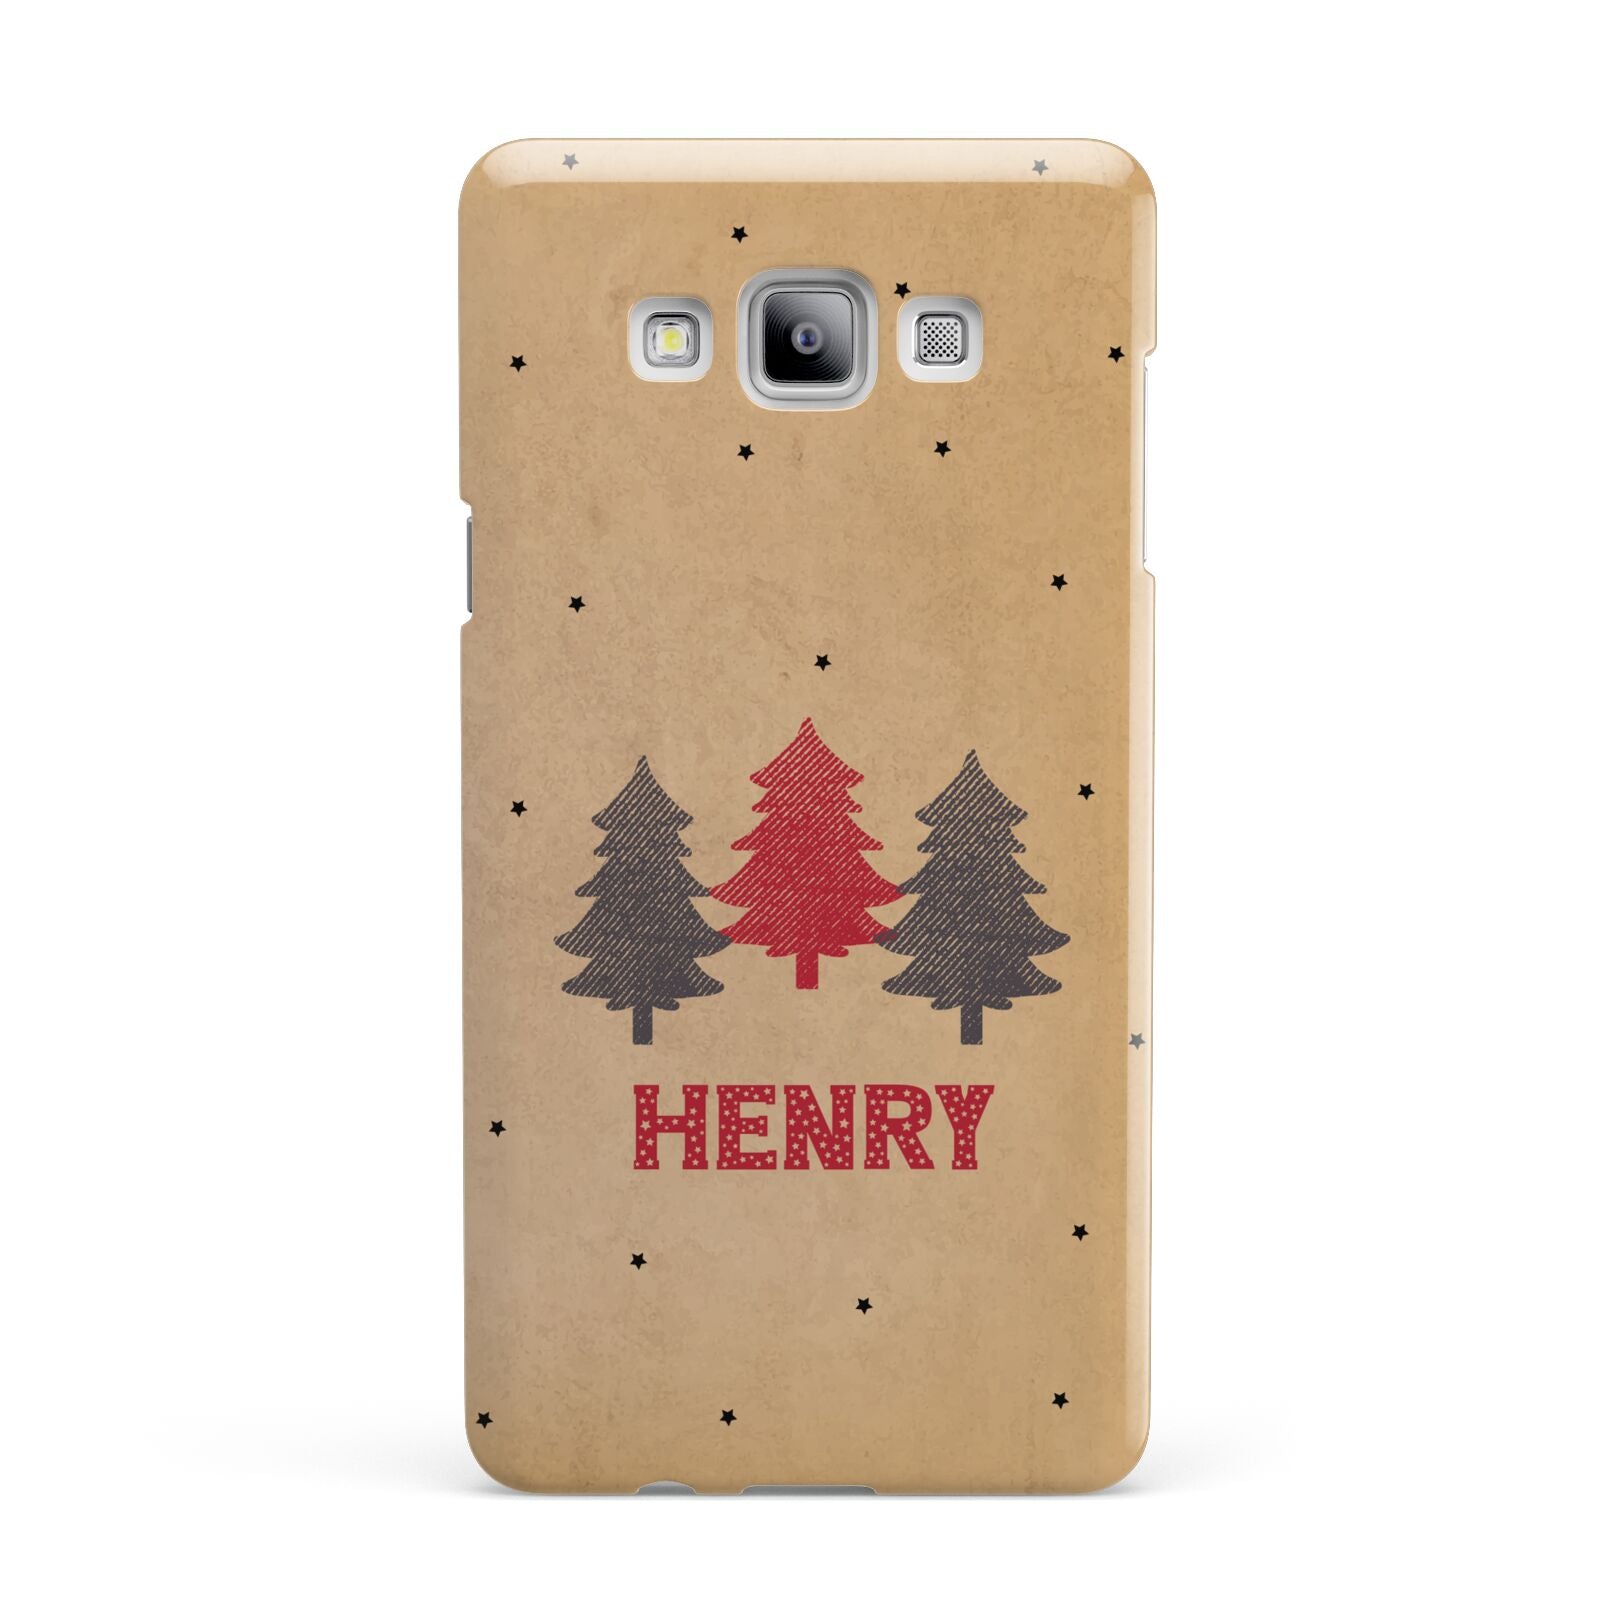 Personalised Christmas Tree Samsung Galaxy A7 2015 Case